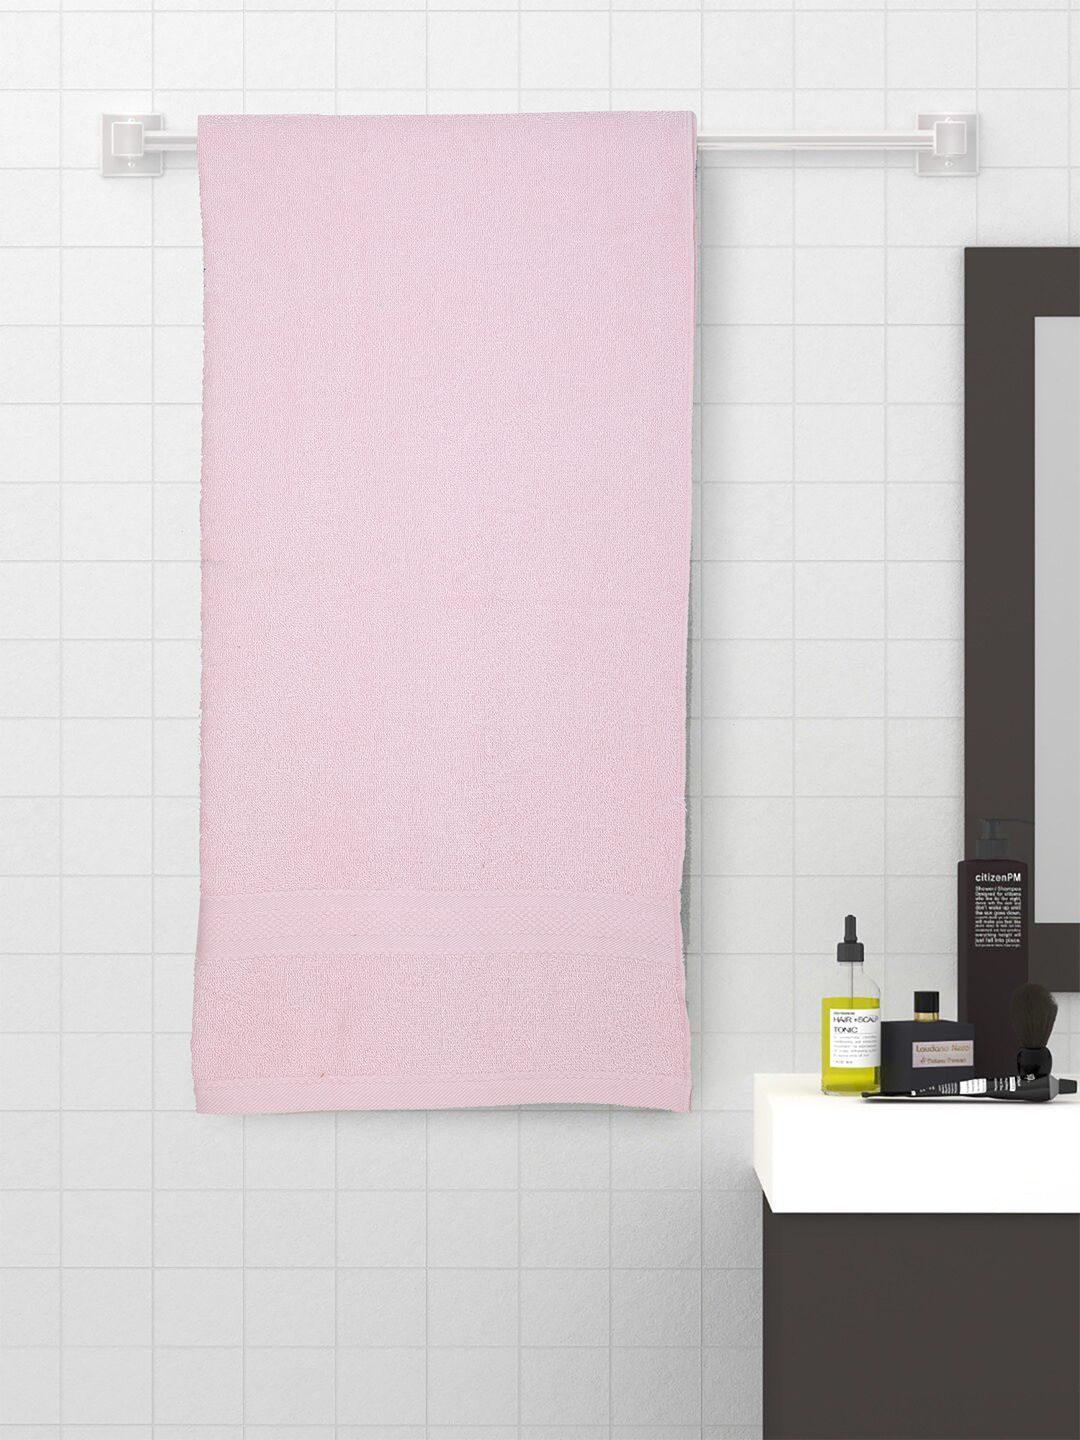 Raymond Home Pink Solid Cotton 450 GSM Bath Towel Price in India